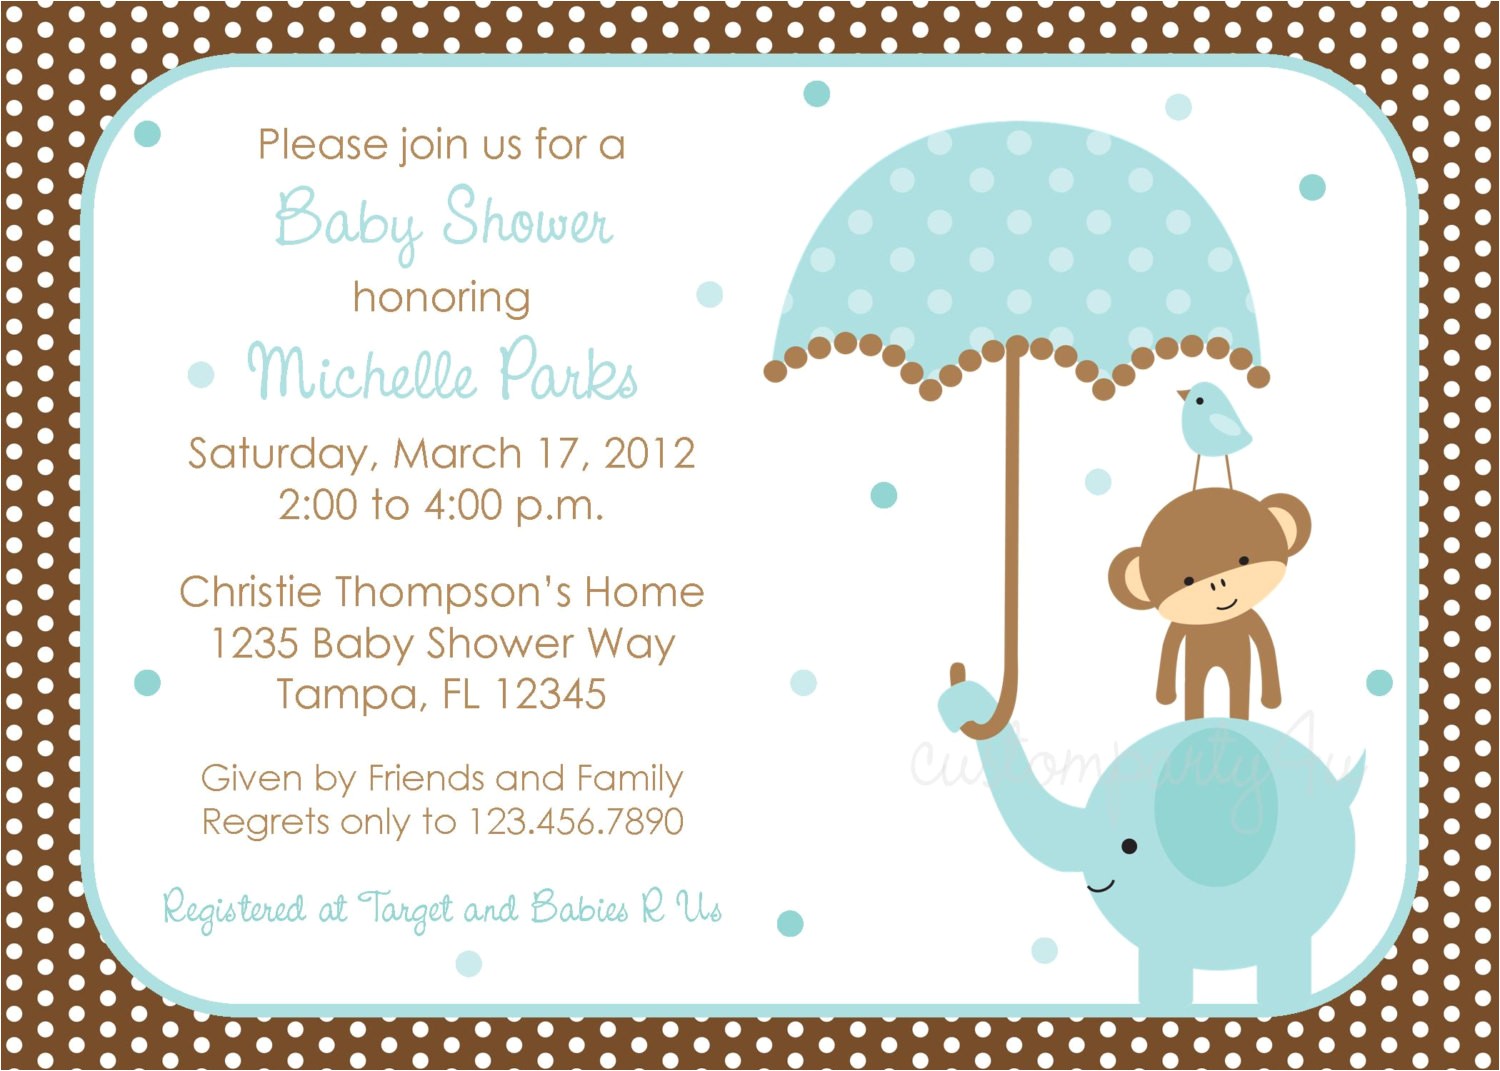 Baby Shower Invitation Pictures for A Boy Free Baby Boy Shower Invitations Templates Baby Boy